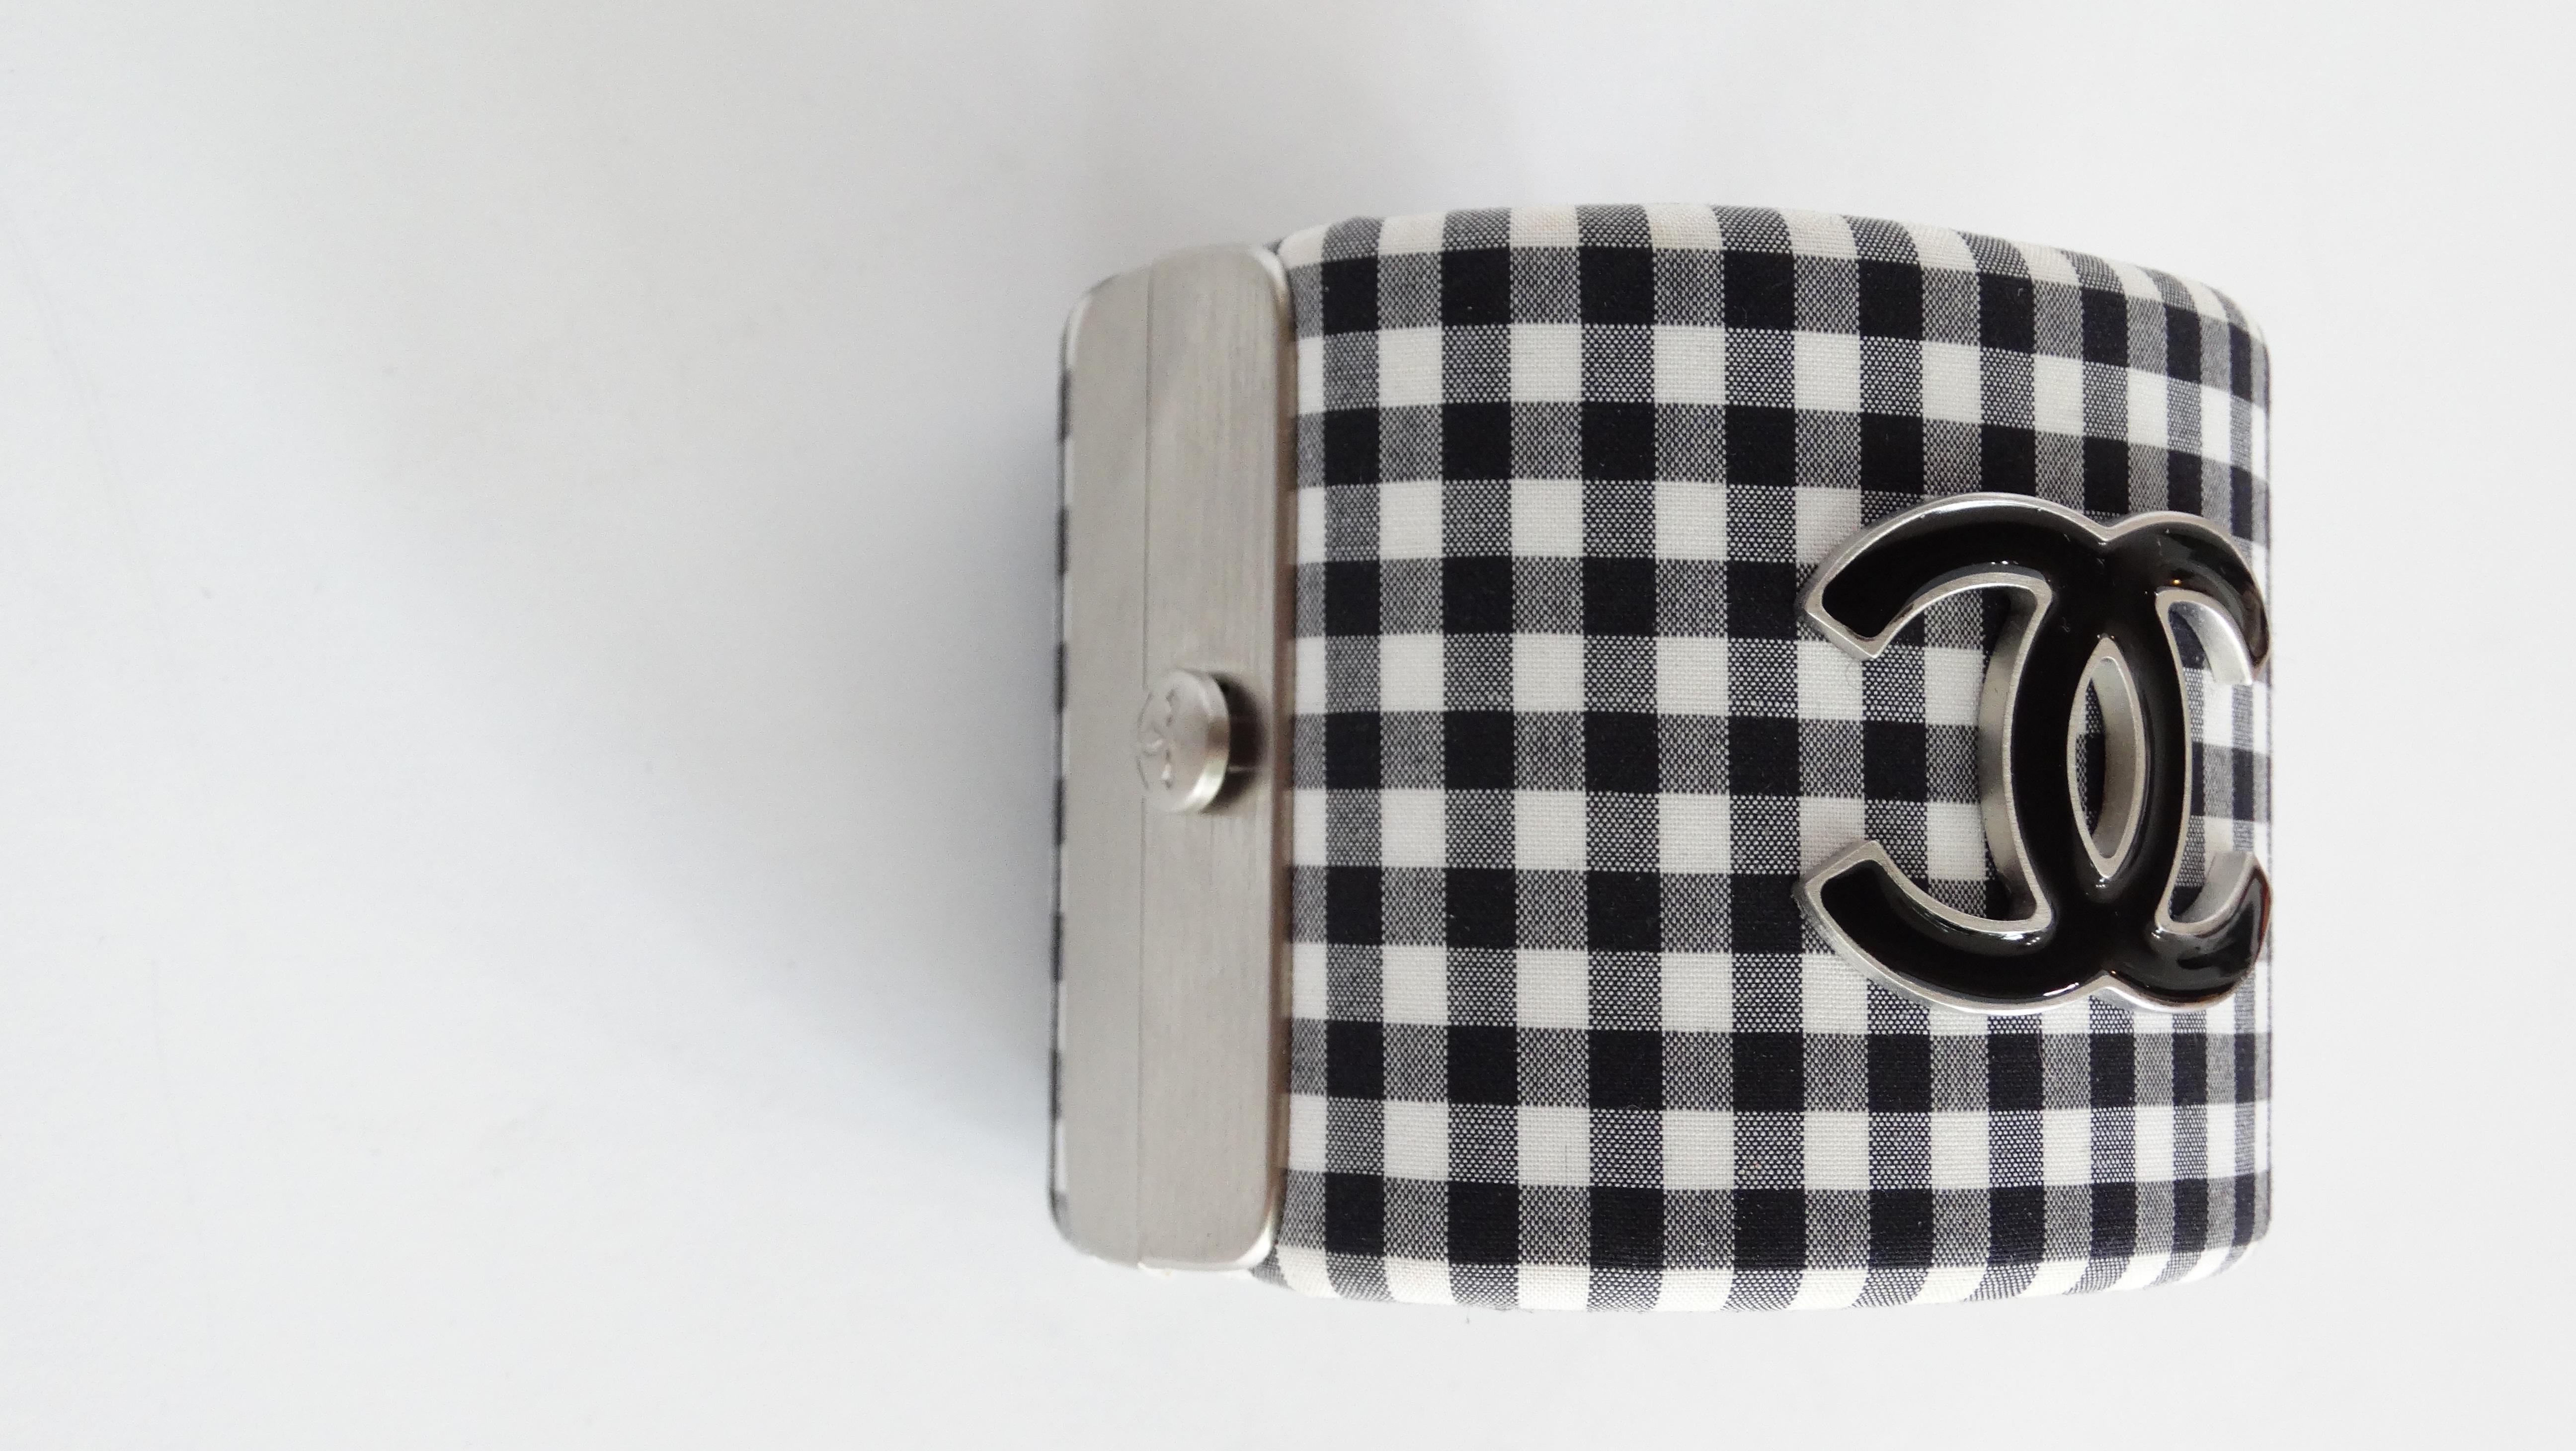 2011 CHANEL Gingham Resin CC Cuff Black White. This fabric covered wide cuff bracelet features a check gingham print with a prominent resin CC design at the front. This is an excellent cuff bracelet with the timeless style only from Chanel!